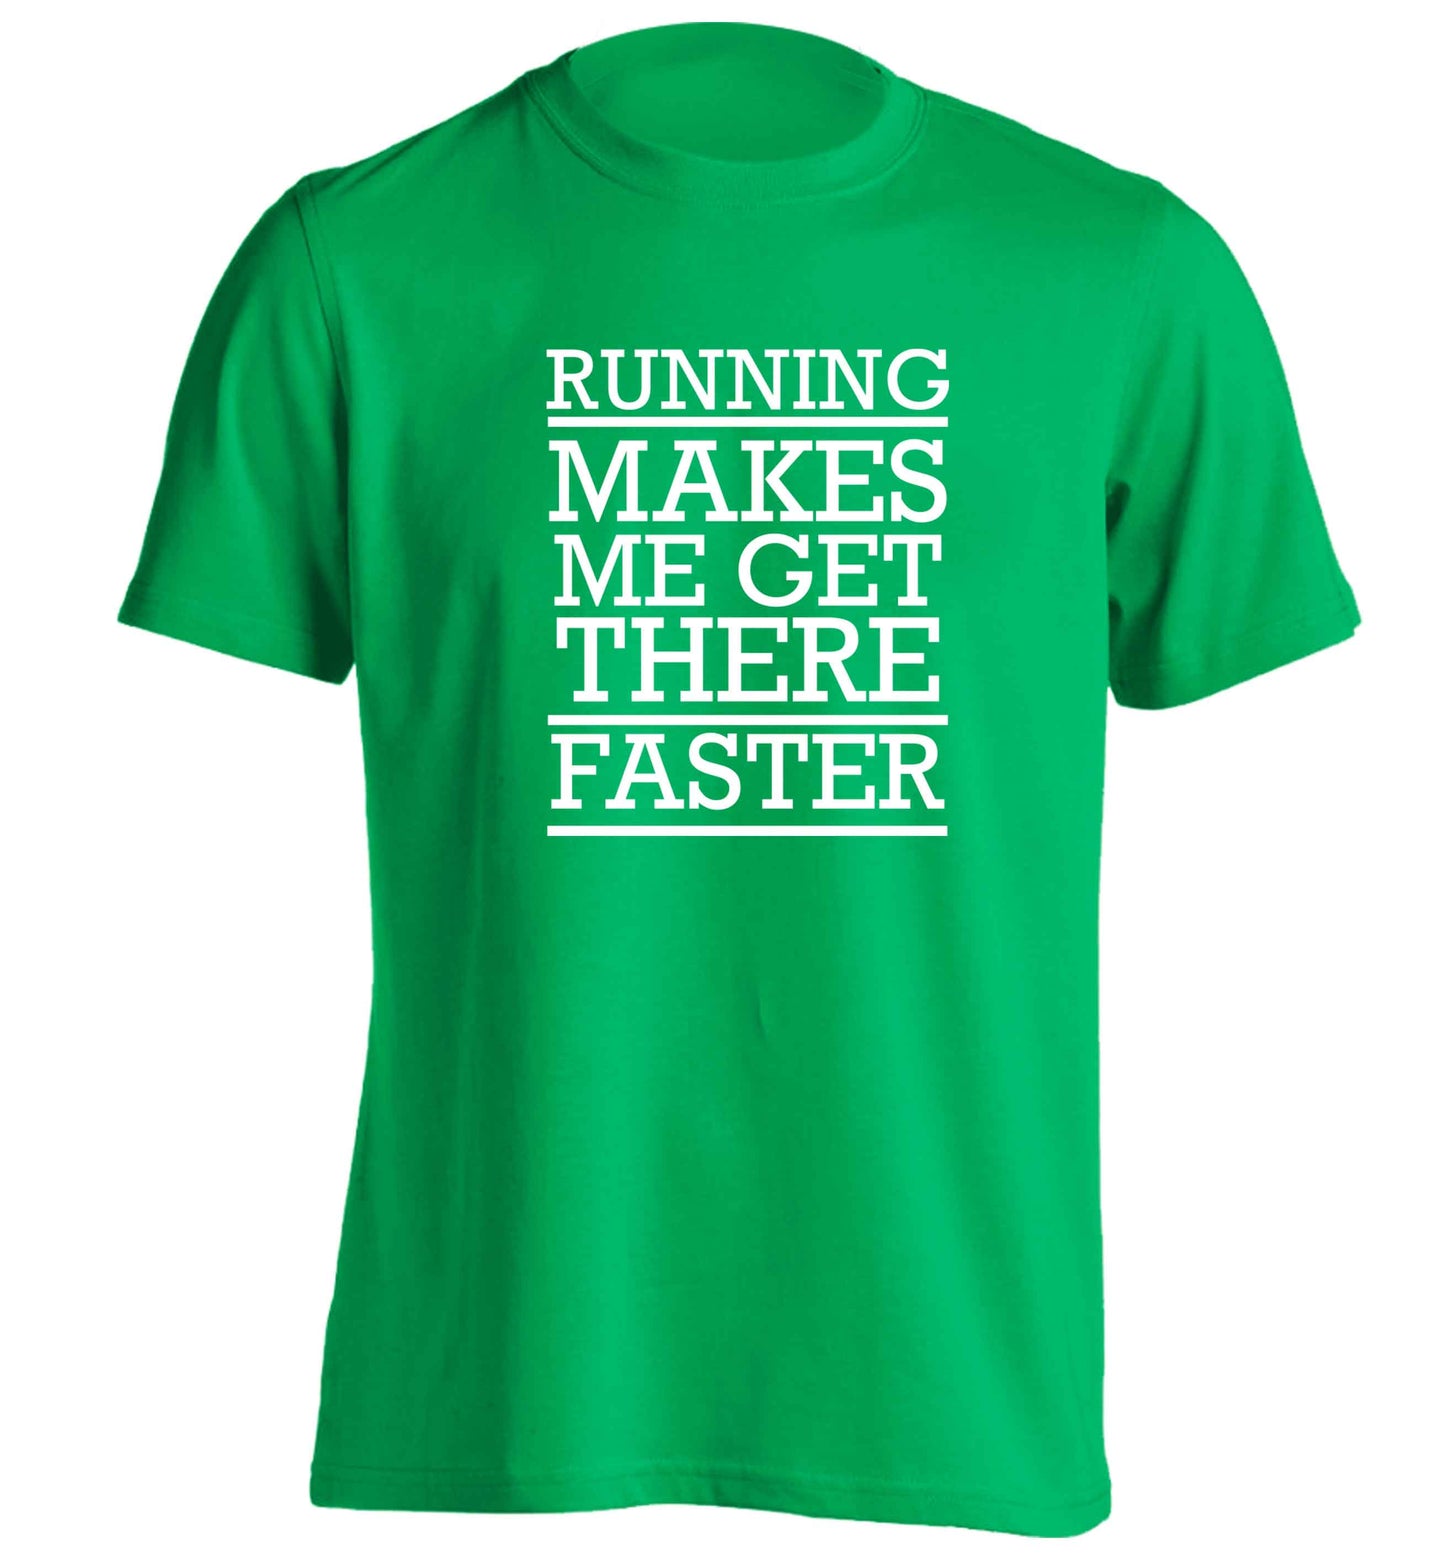 Running makes me get there faster adults unisex green Tshirt 2XL